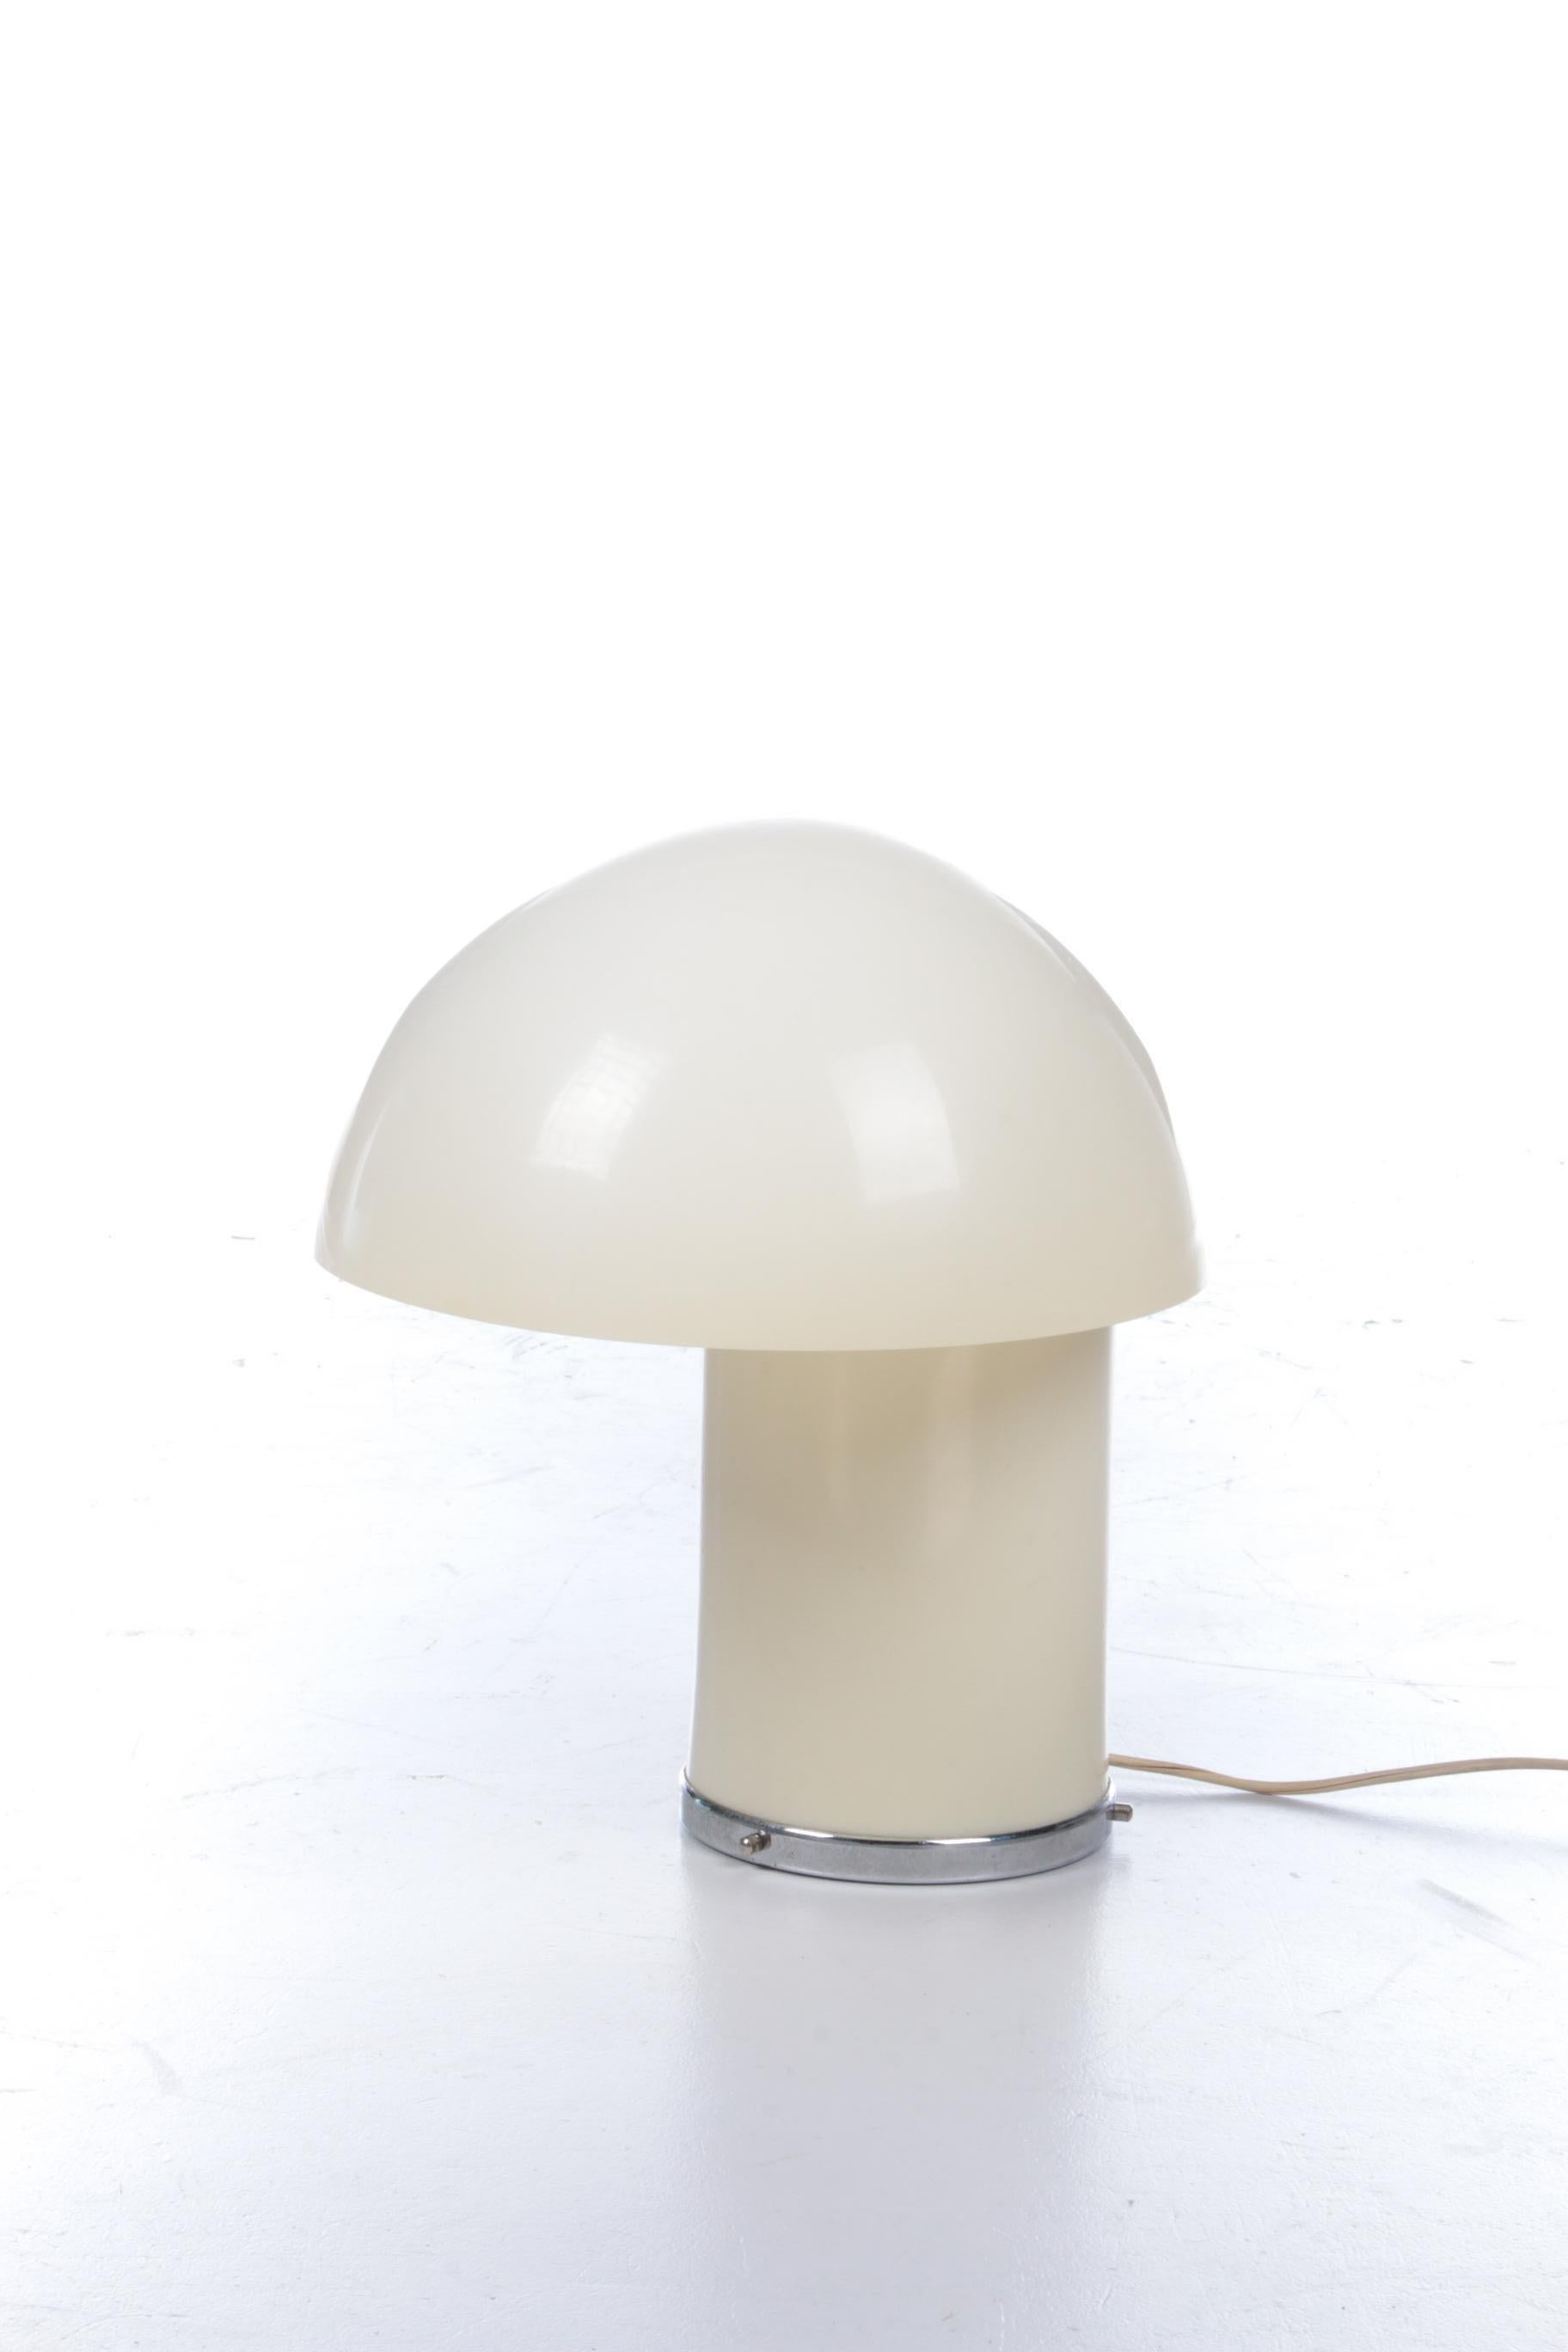 Vintage table lamp Verner Panton for Collezioni Longato Padova Model Leila.


A beautiful table lamp designed by Verner Panton and Marcello Siard.

The hat is fused with the trunk so that the lamp lights up in a very special way when it is